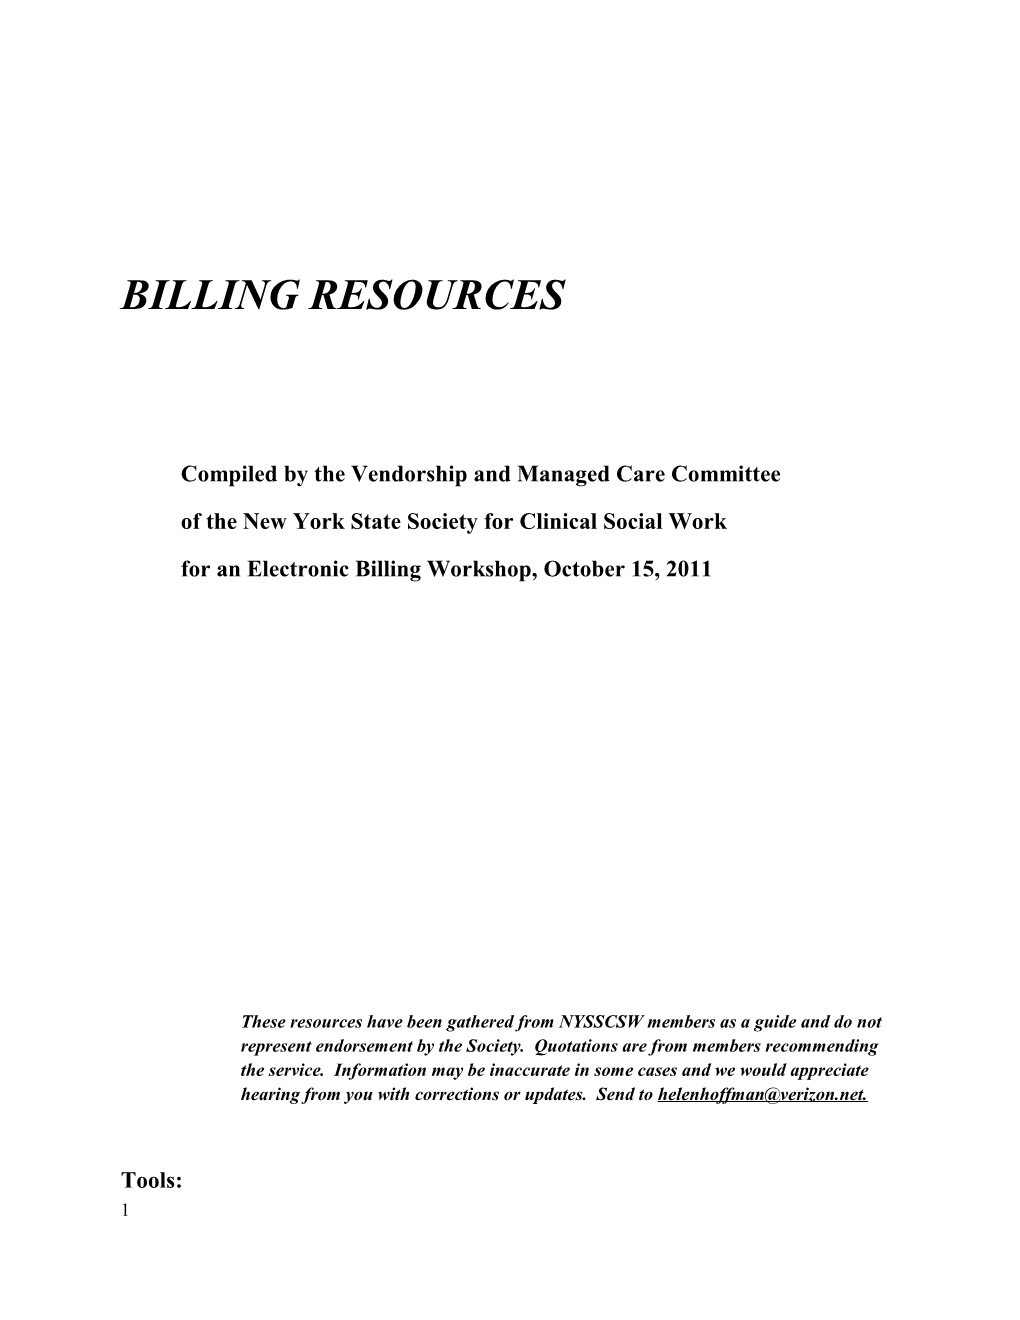 Compiled by the Vendorship and Managed Care Committee